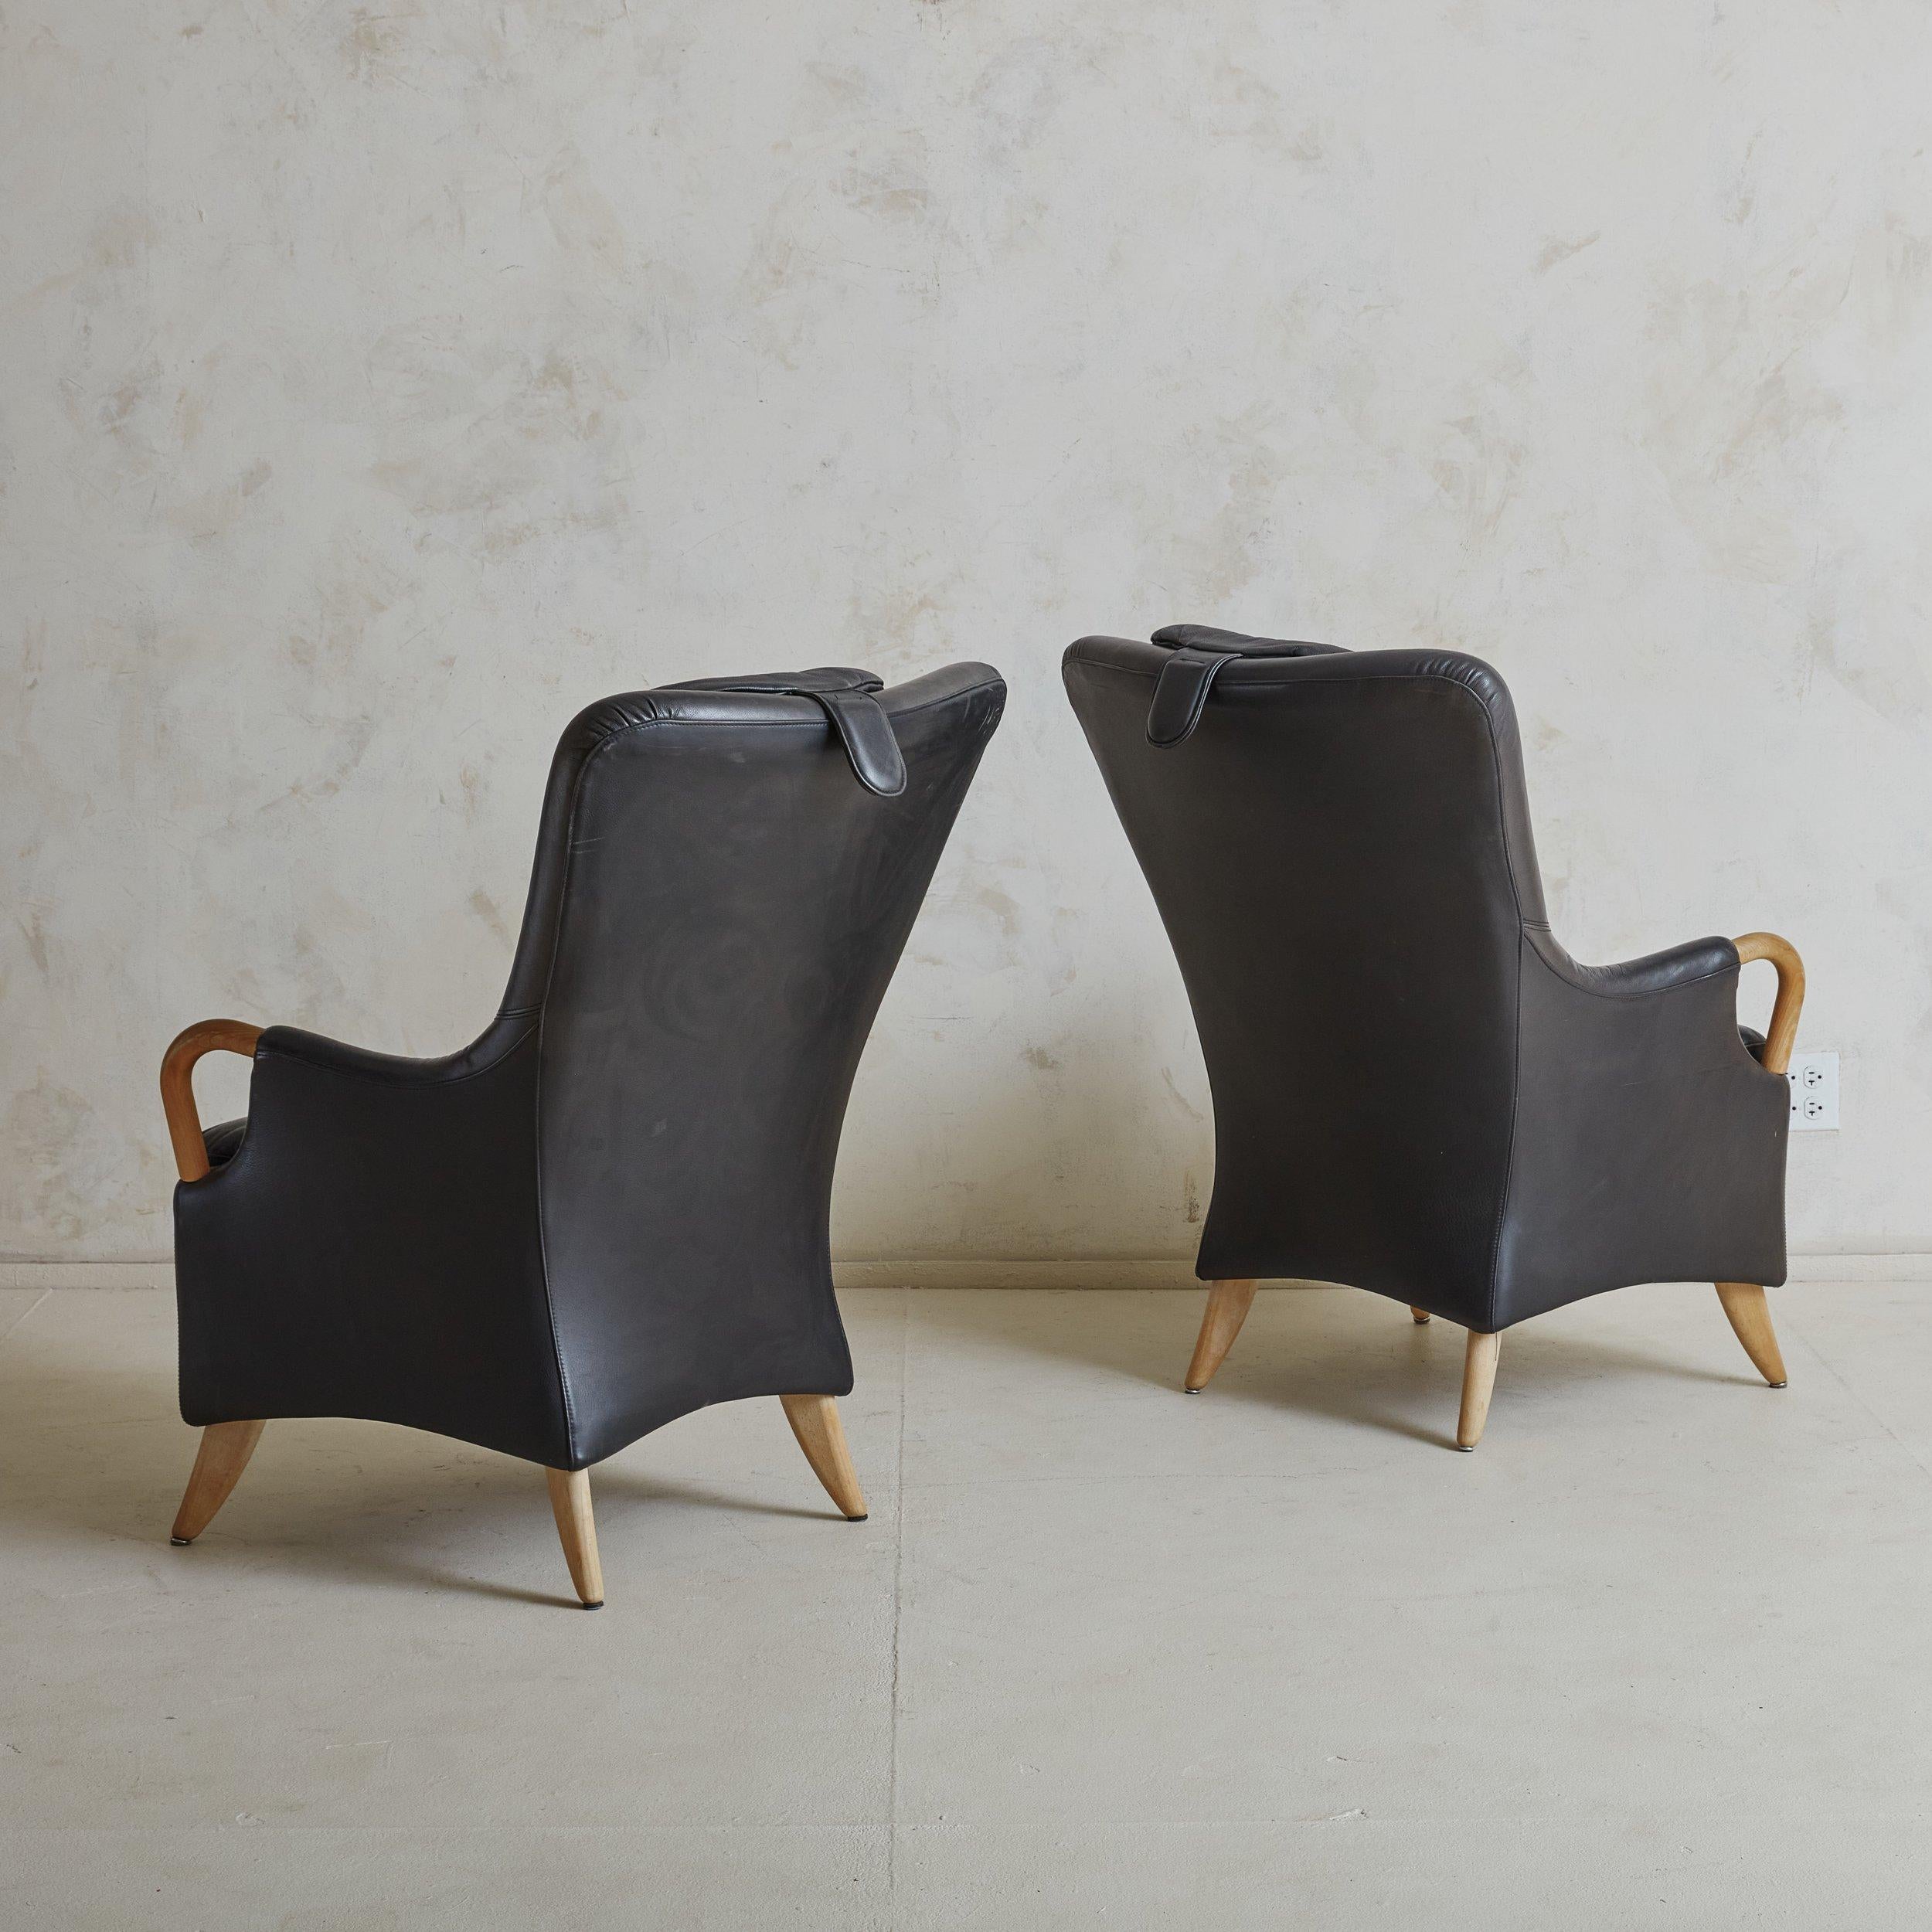 Scandinavian Modern Pair of Black Leather Armchairs with Footstool by Both Søren Nissen & Ebbe Gehl For Sale